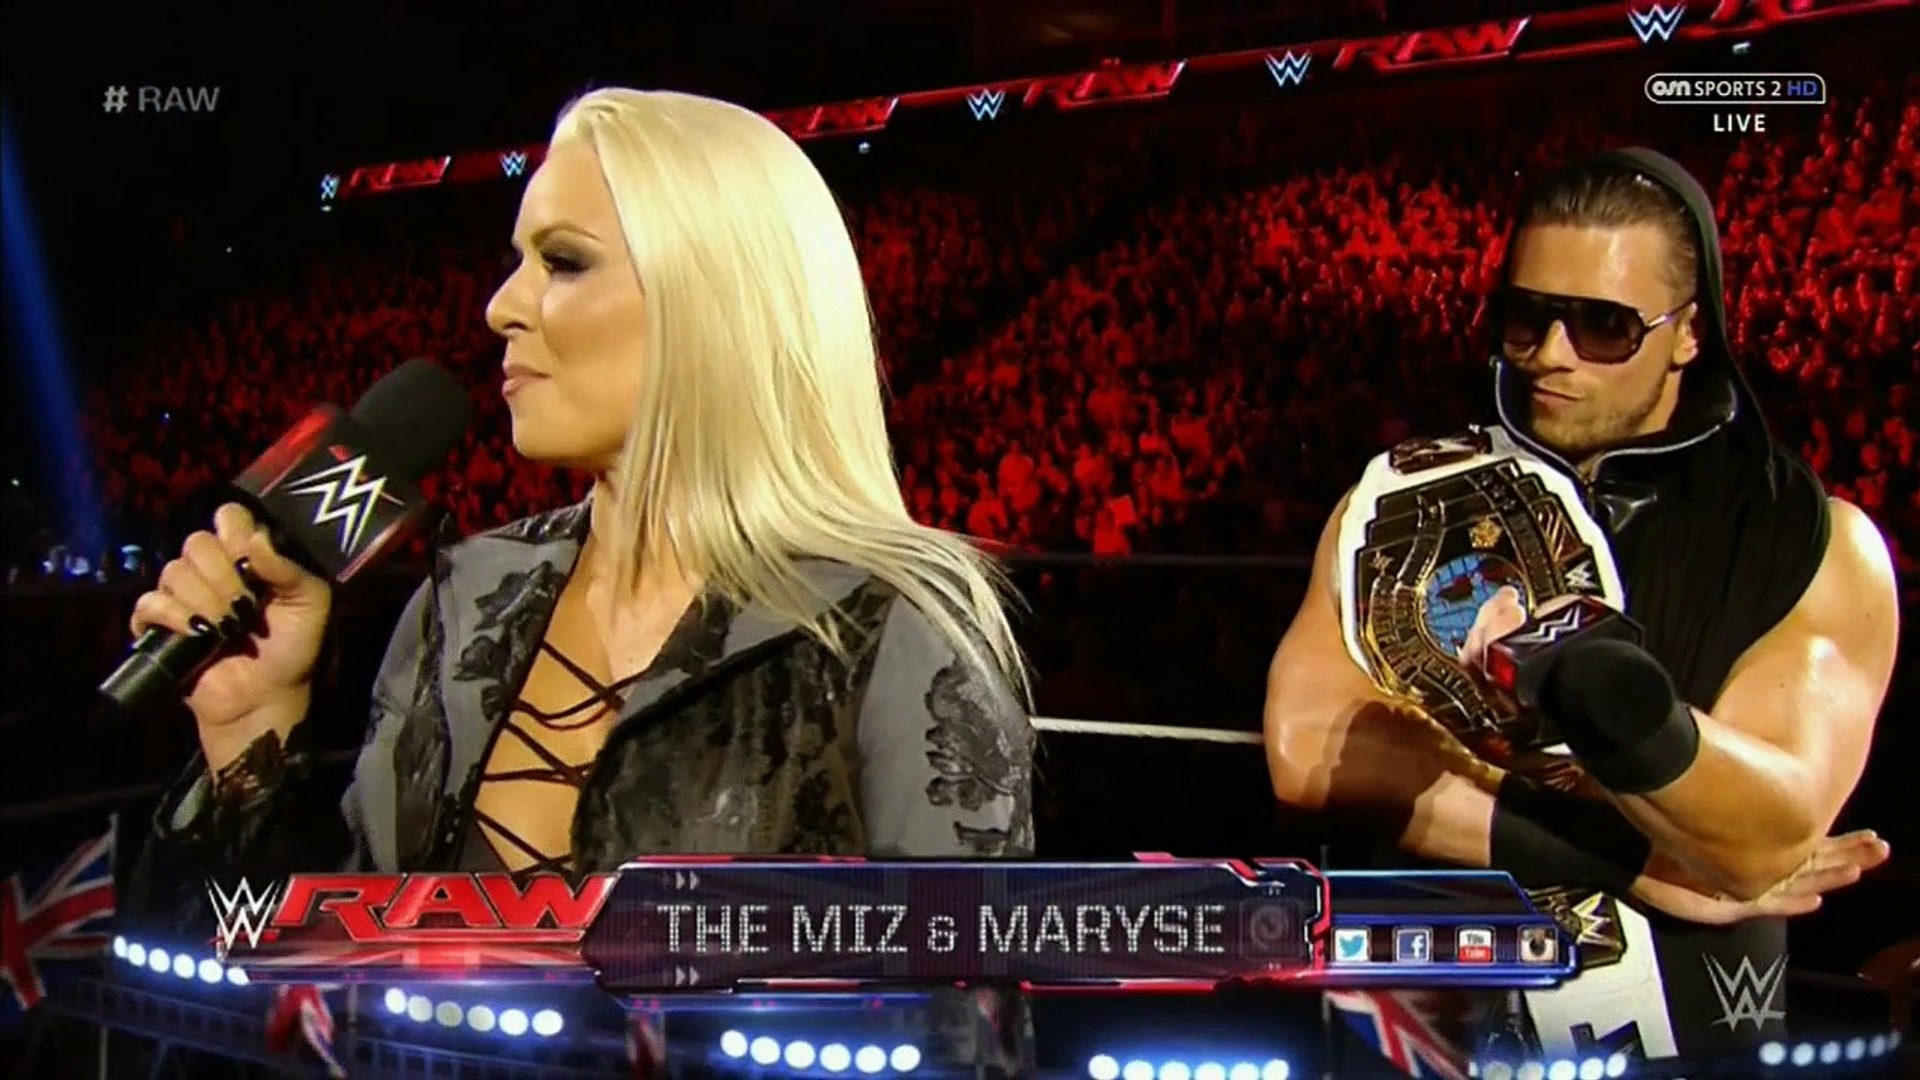 The Miz, Maryse, Cesaro and The League Of Nations Segment image